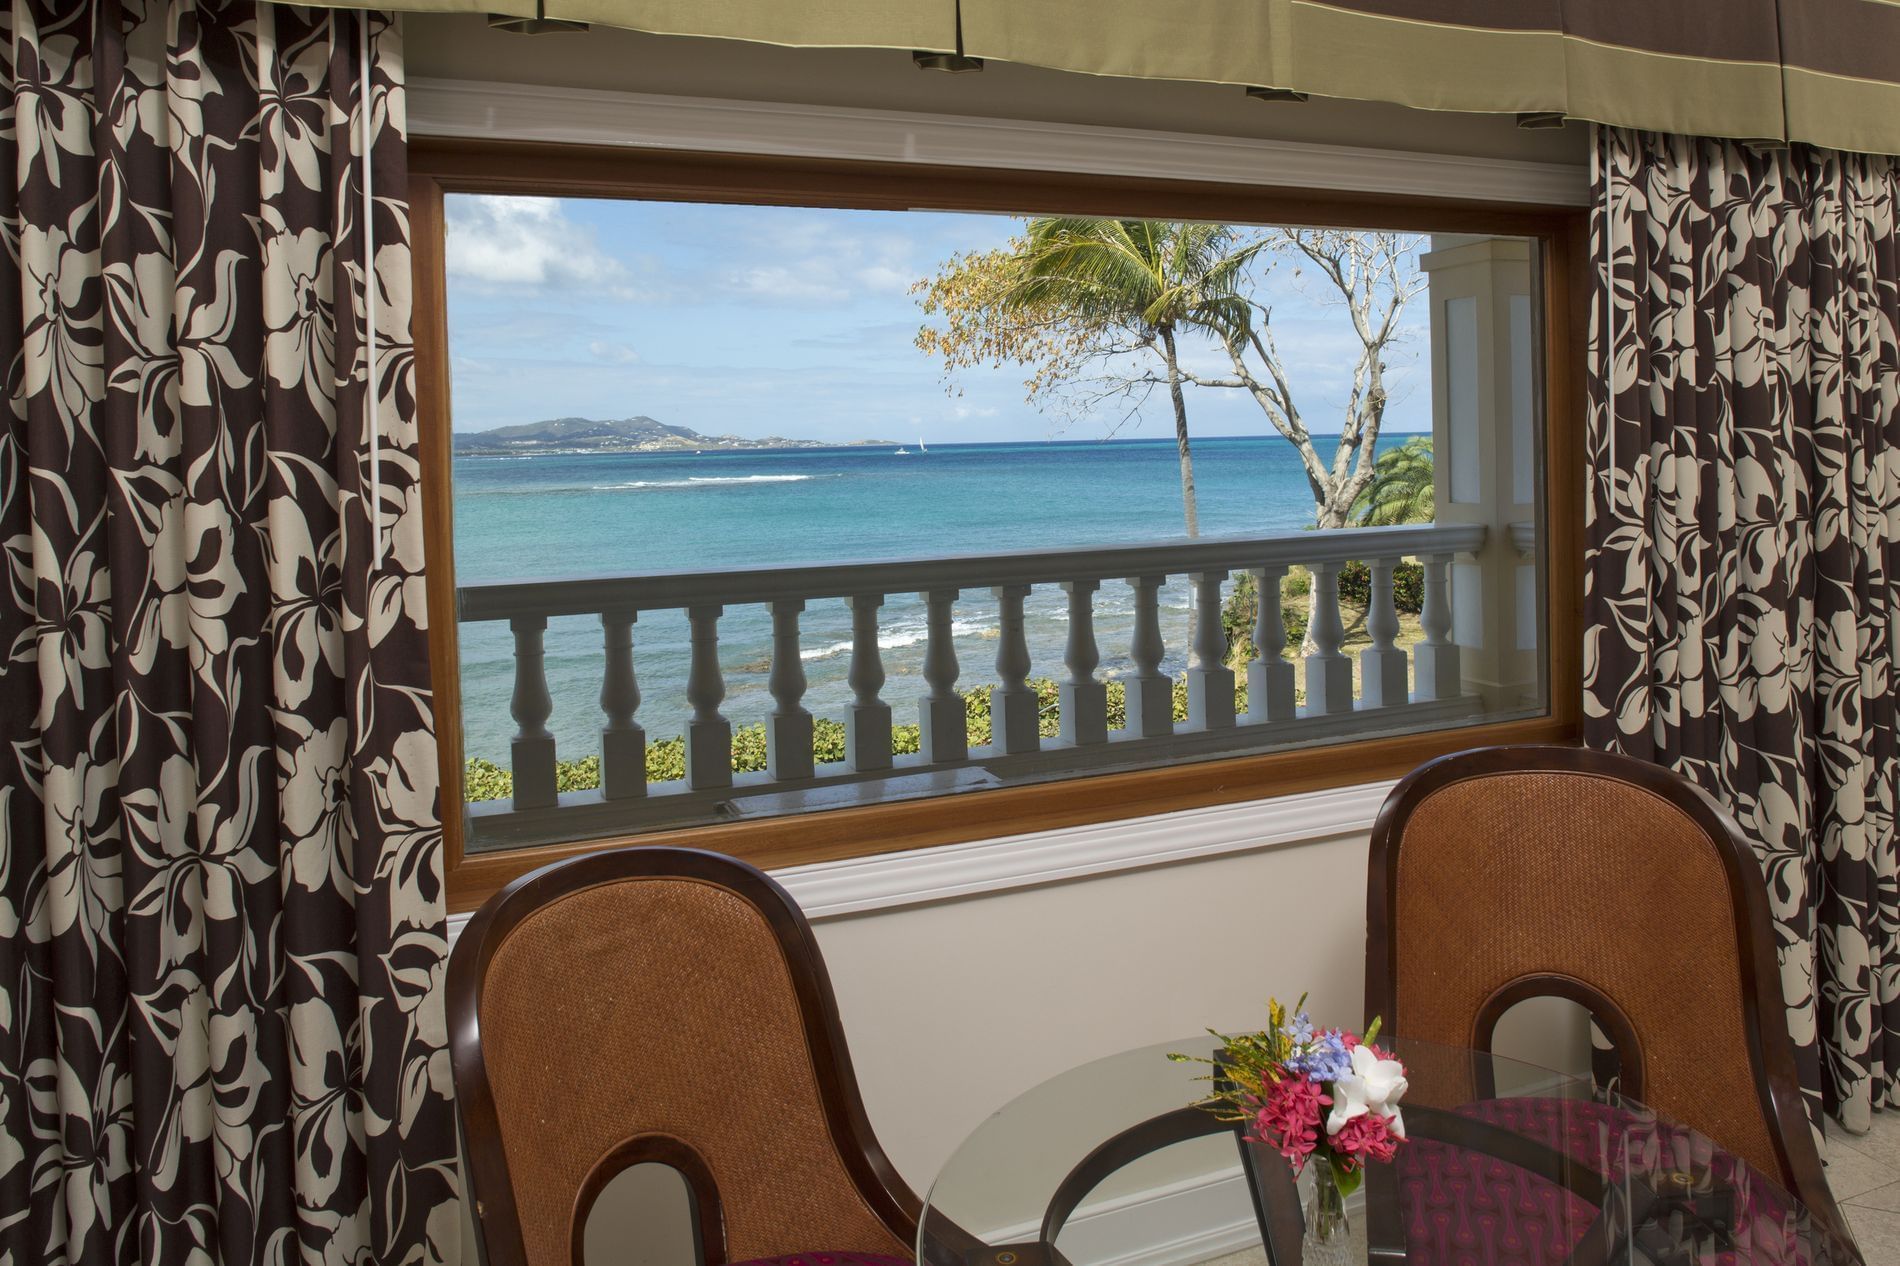 The sea view from Luxury Beachside Doubloons at The Buccaneer Resort St. Croix